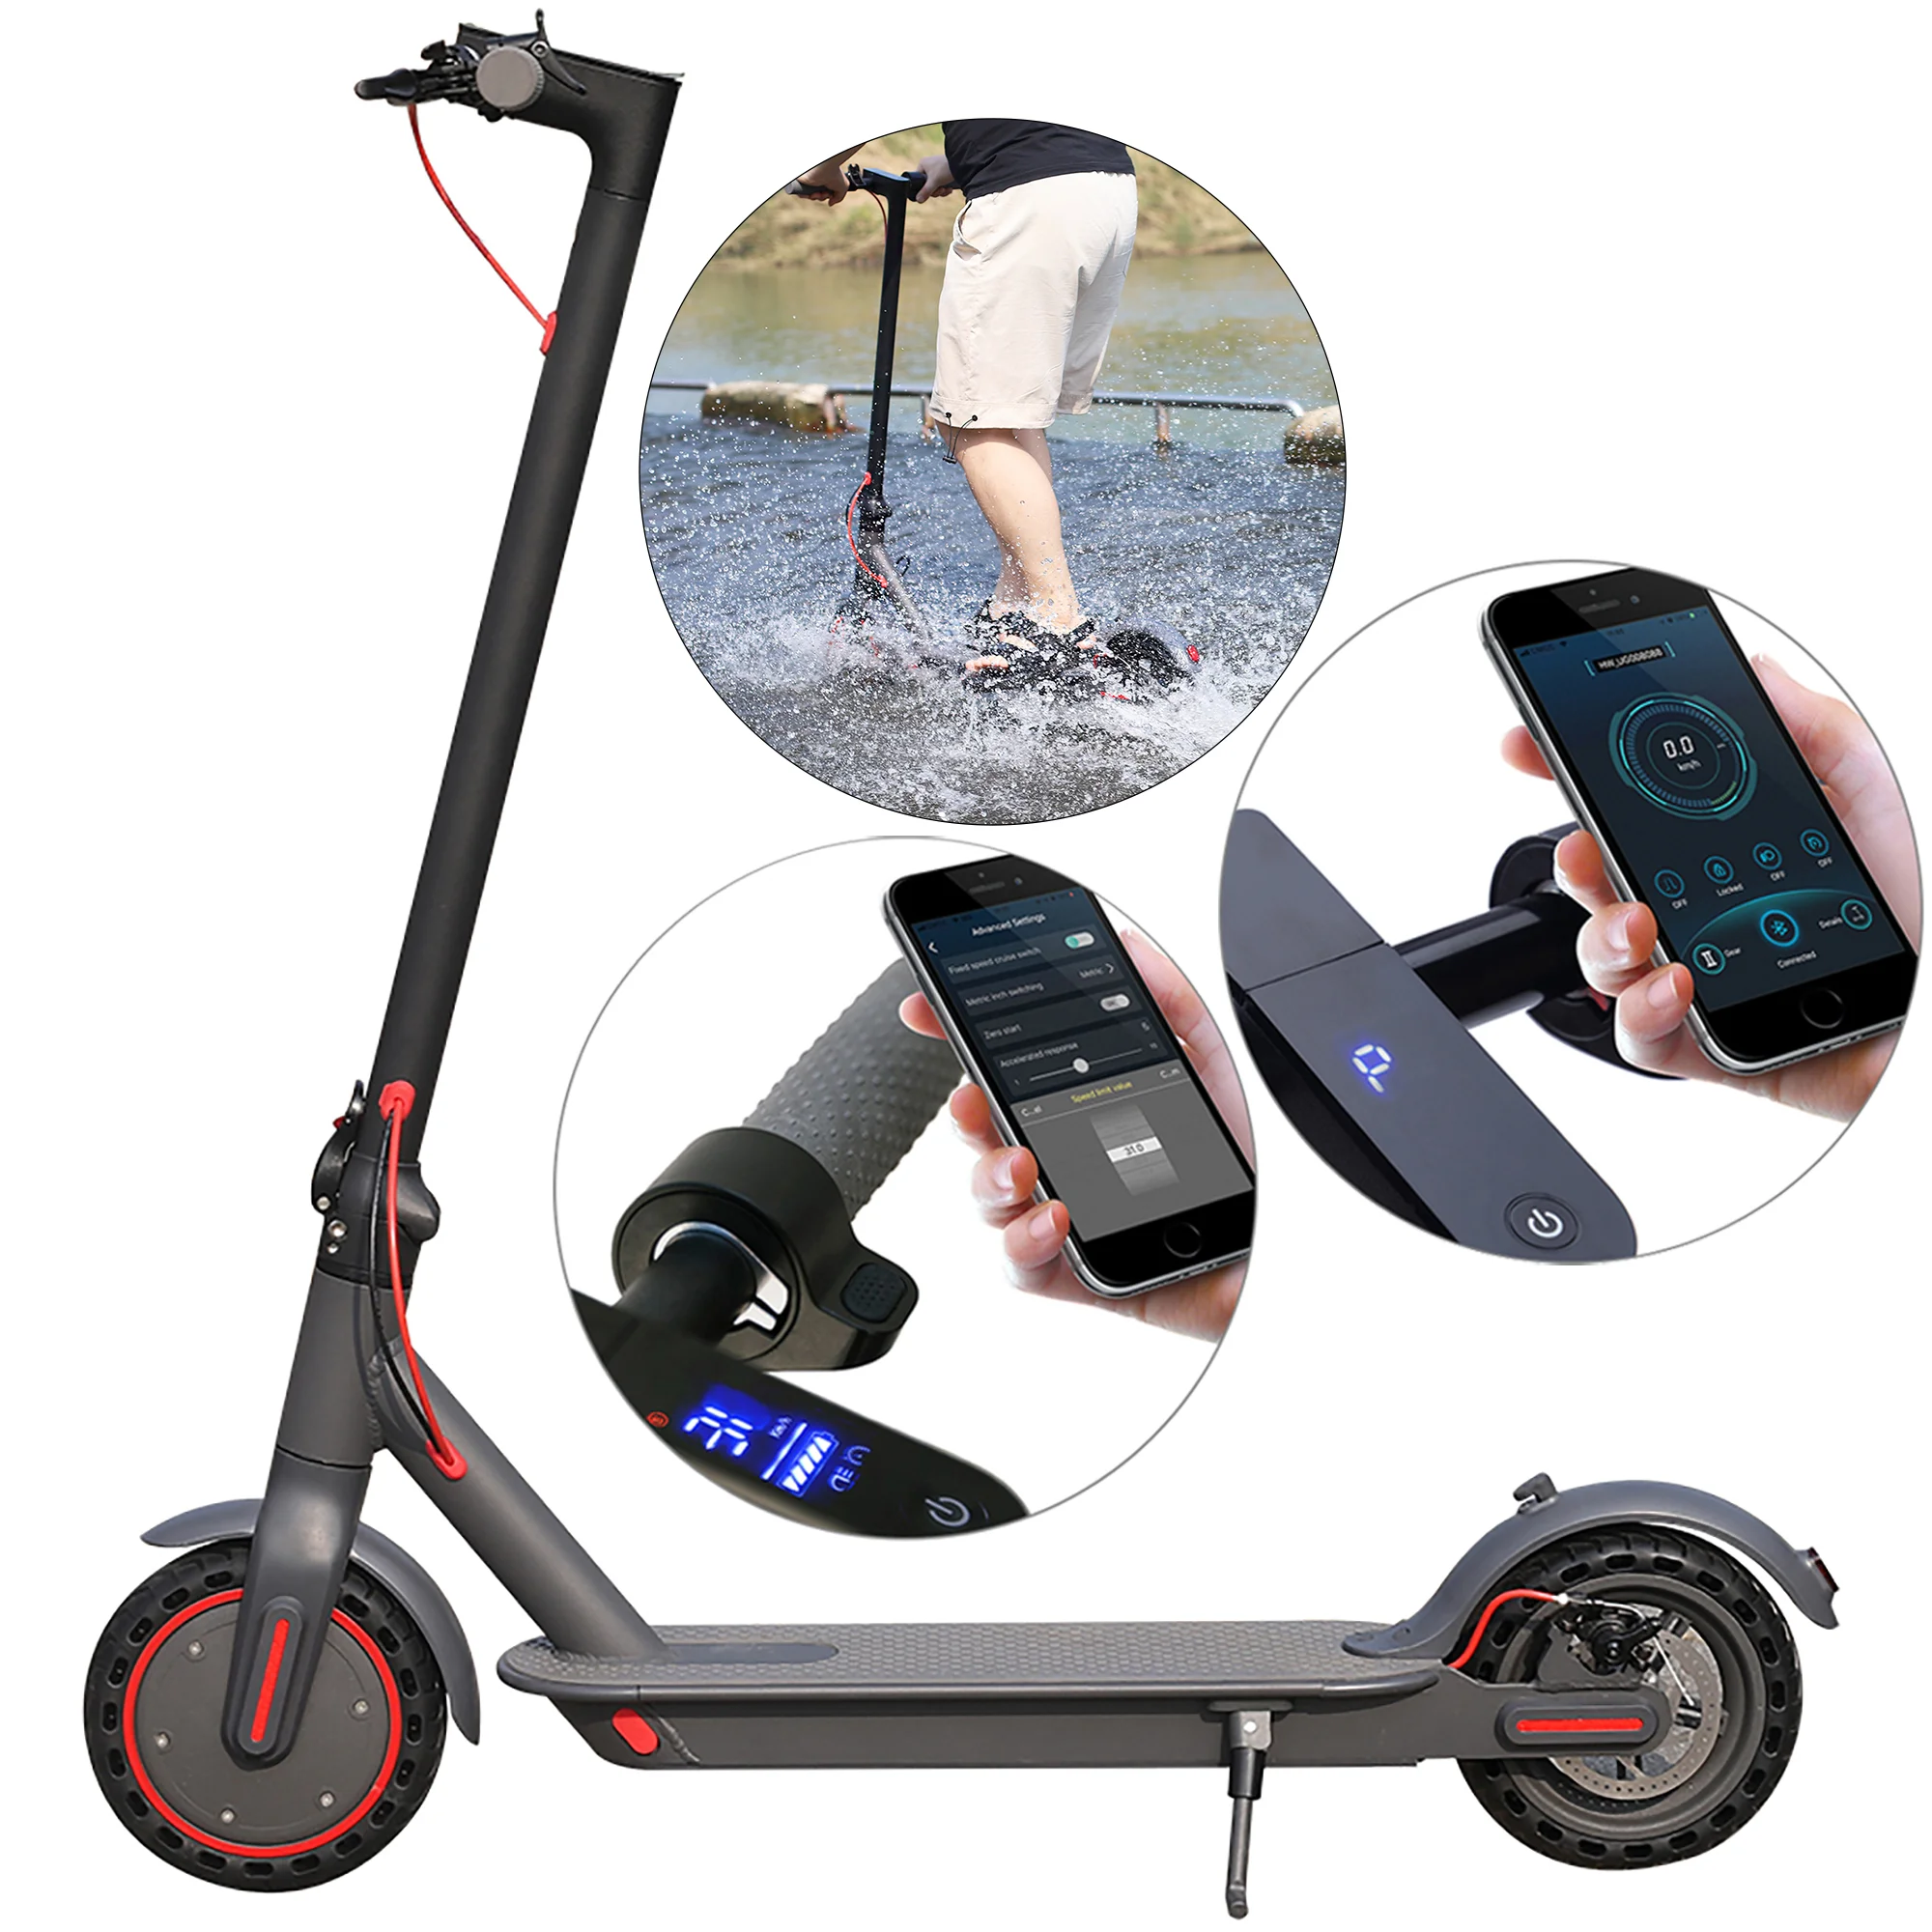 

2021 New arrival EU stock electric scooter adults foldable 8.5 inch e scooter aovo M365 350w for adults